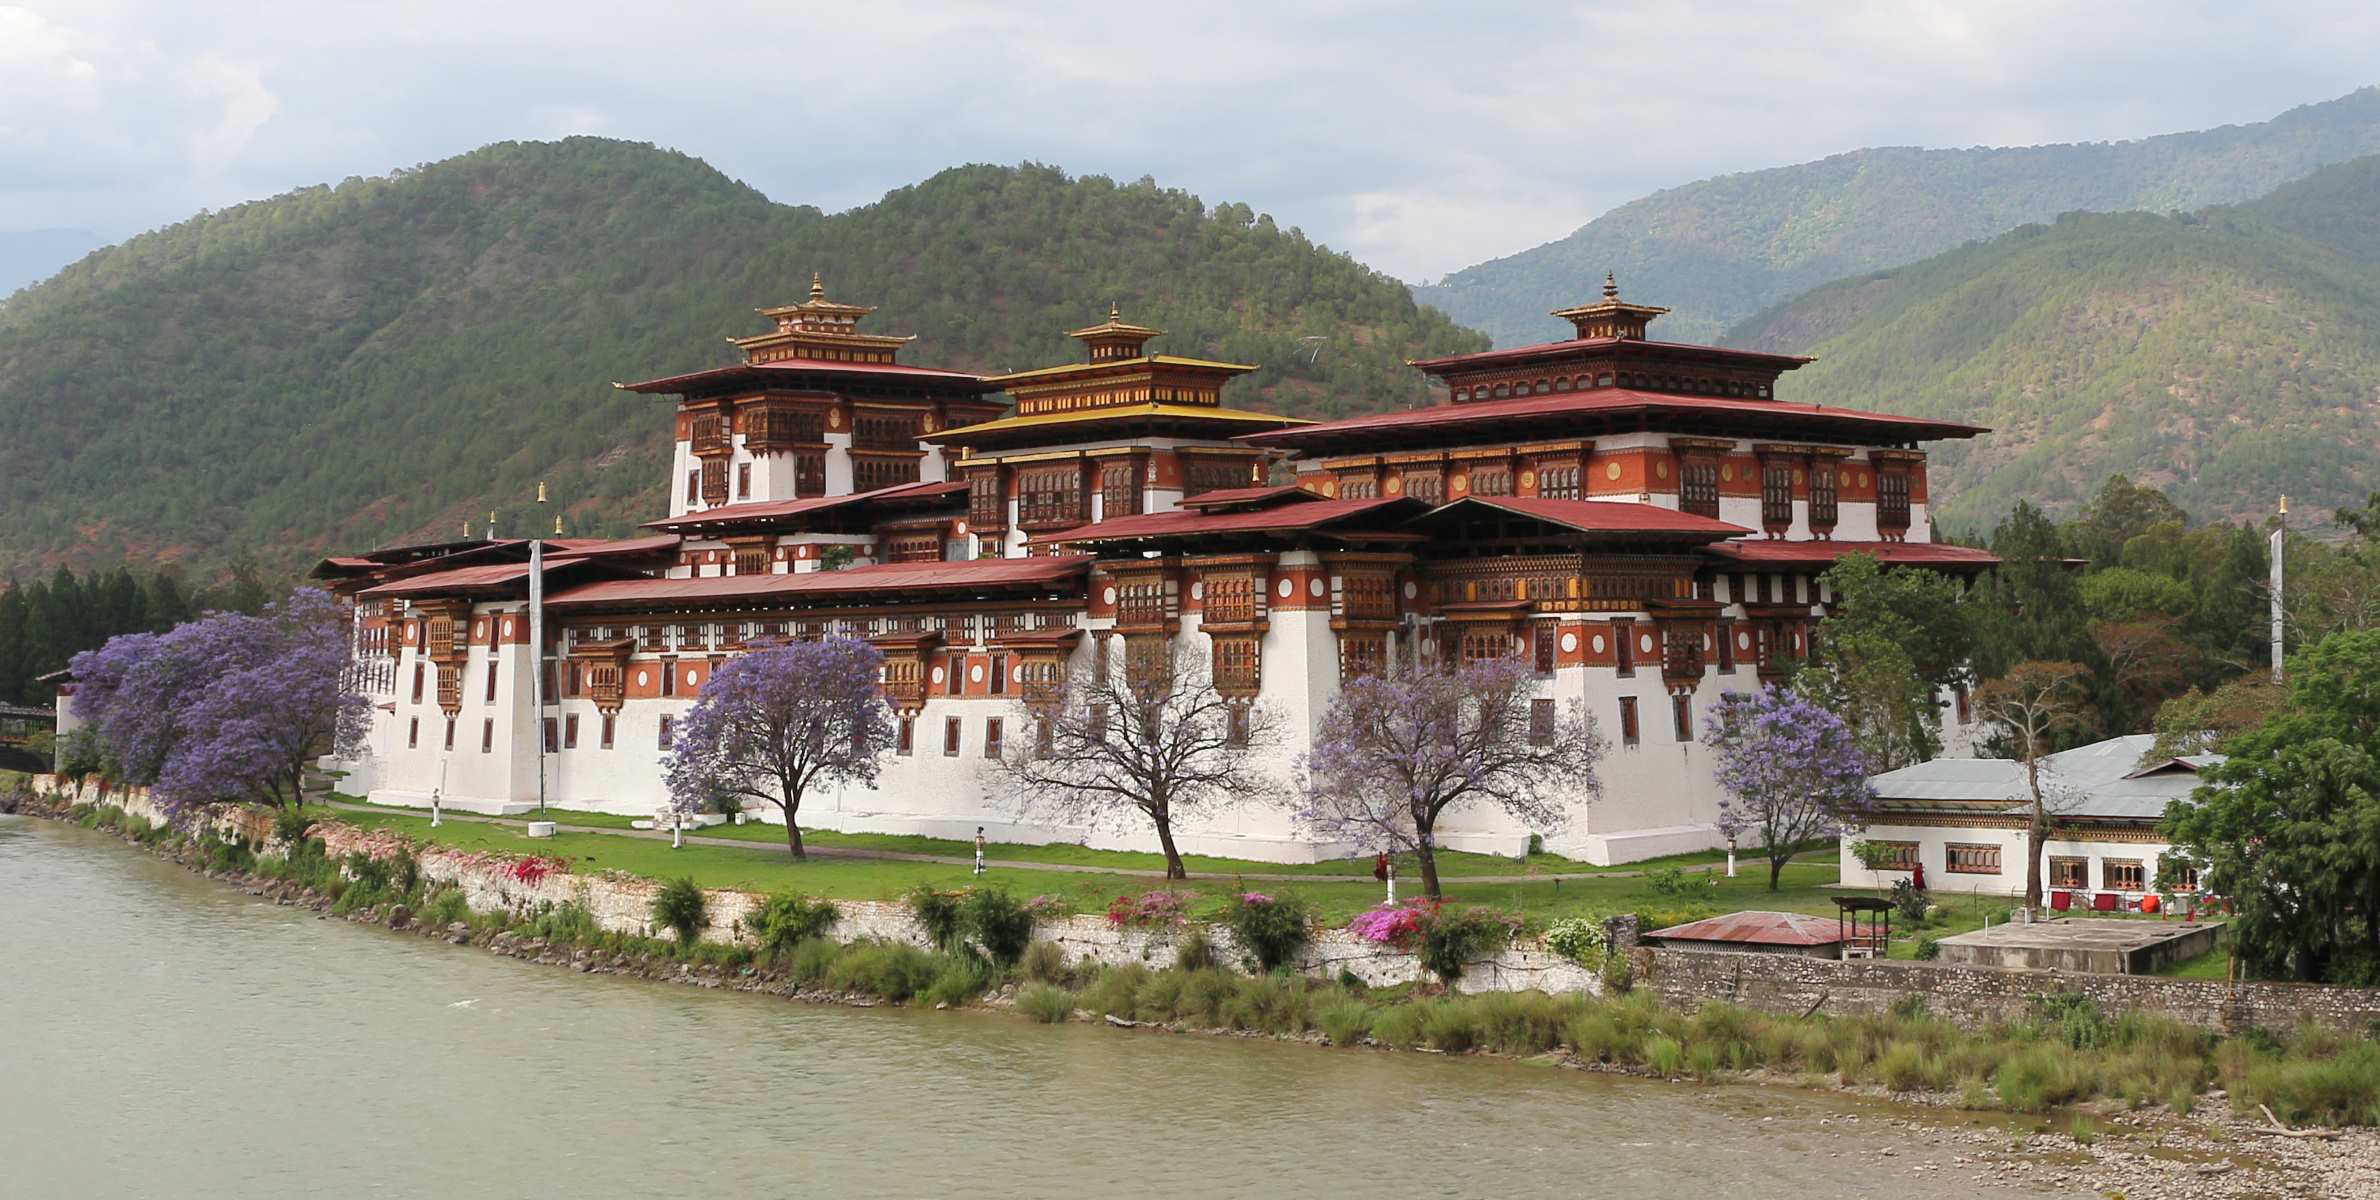 18-intriguing-facts-about-punakha-dzong-with-monastic-sections